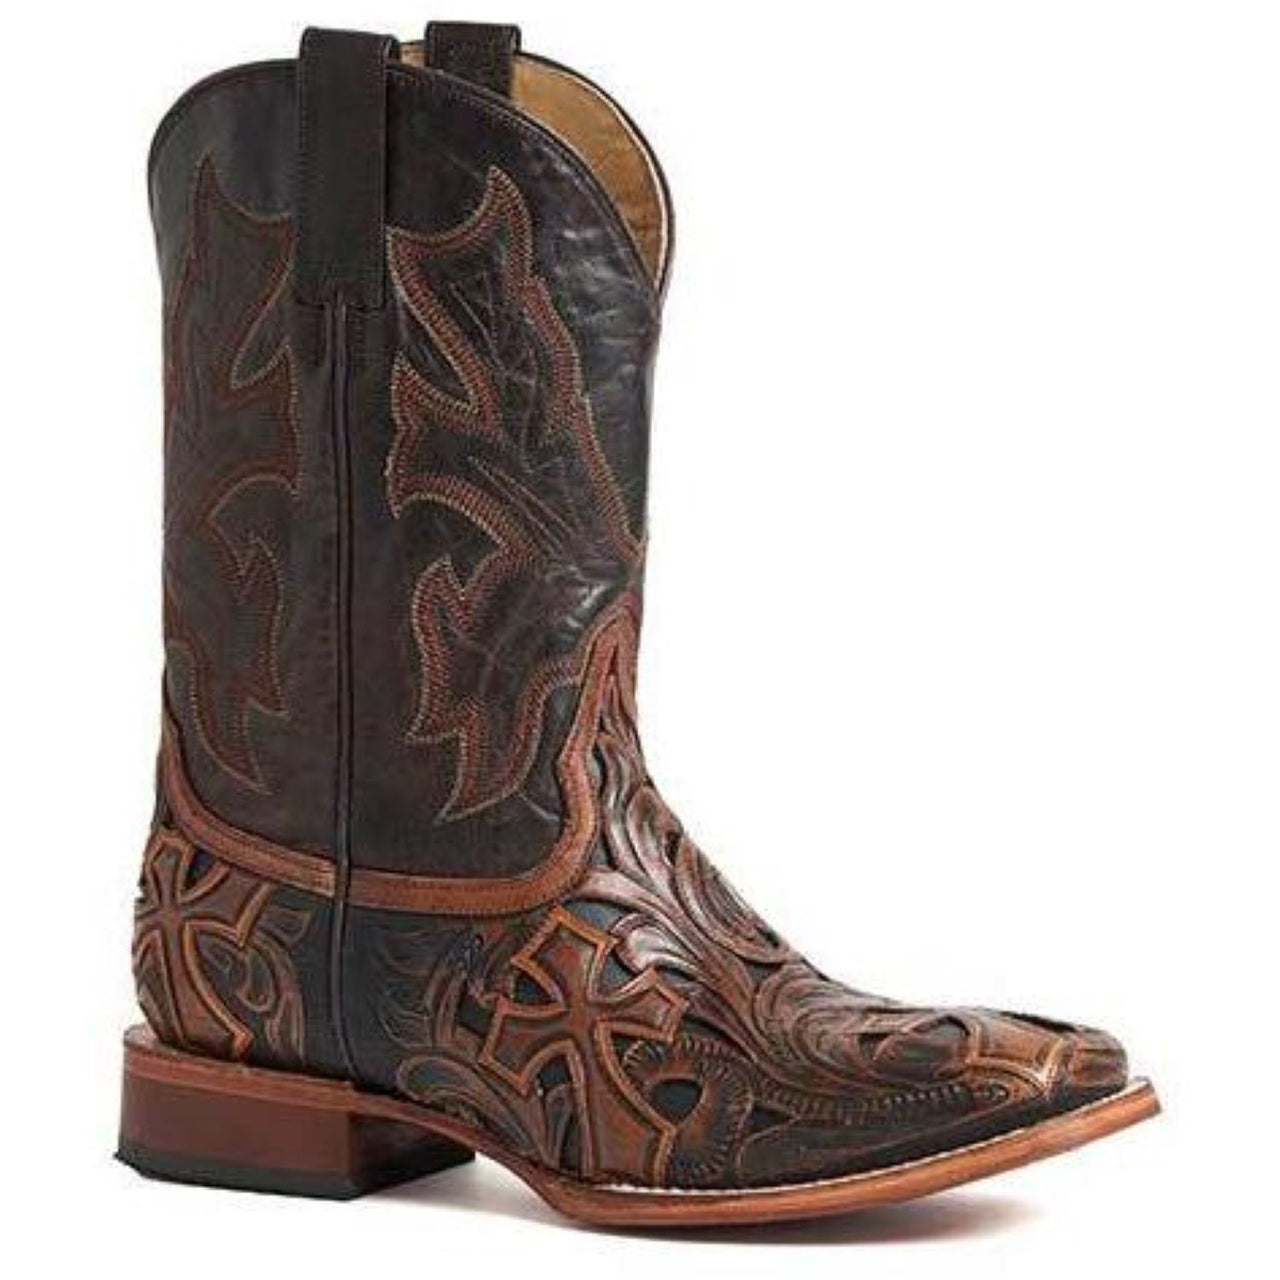 Men's Stetson Handtooled Cross Leather Boots Handcrafted Brown - yeehawcowboy